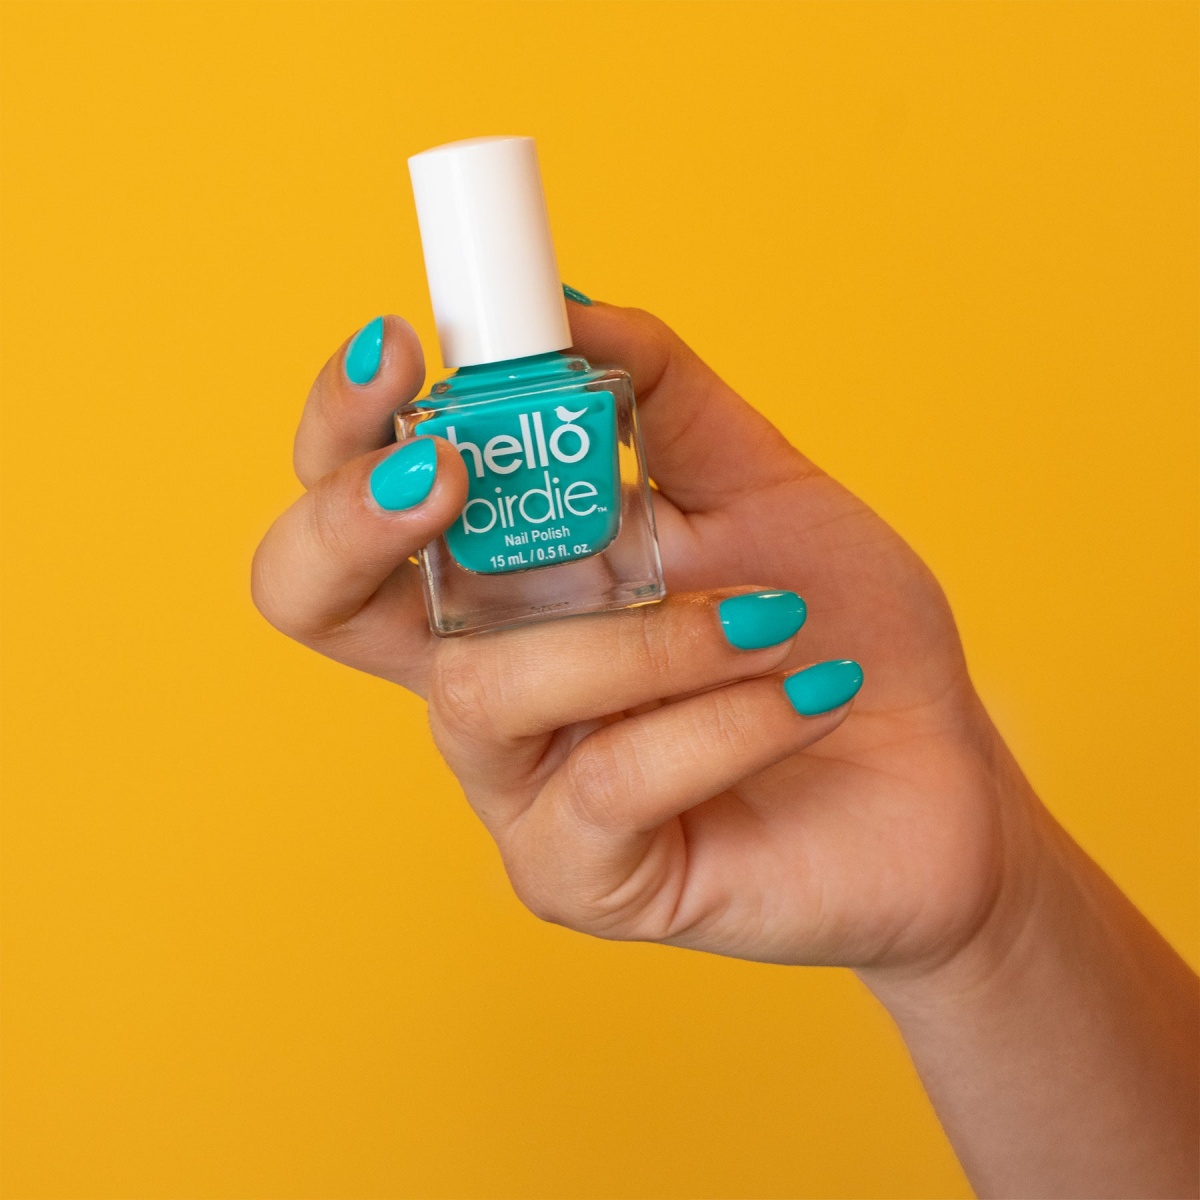 Summertime Blues Cool Colors for Your Nails - Hello Birdie